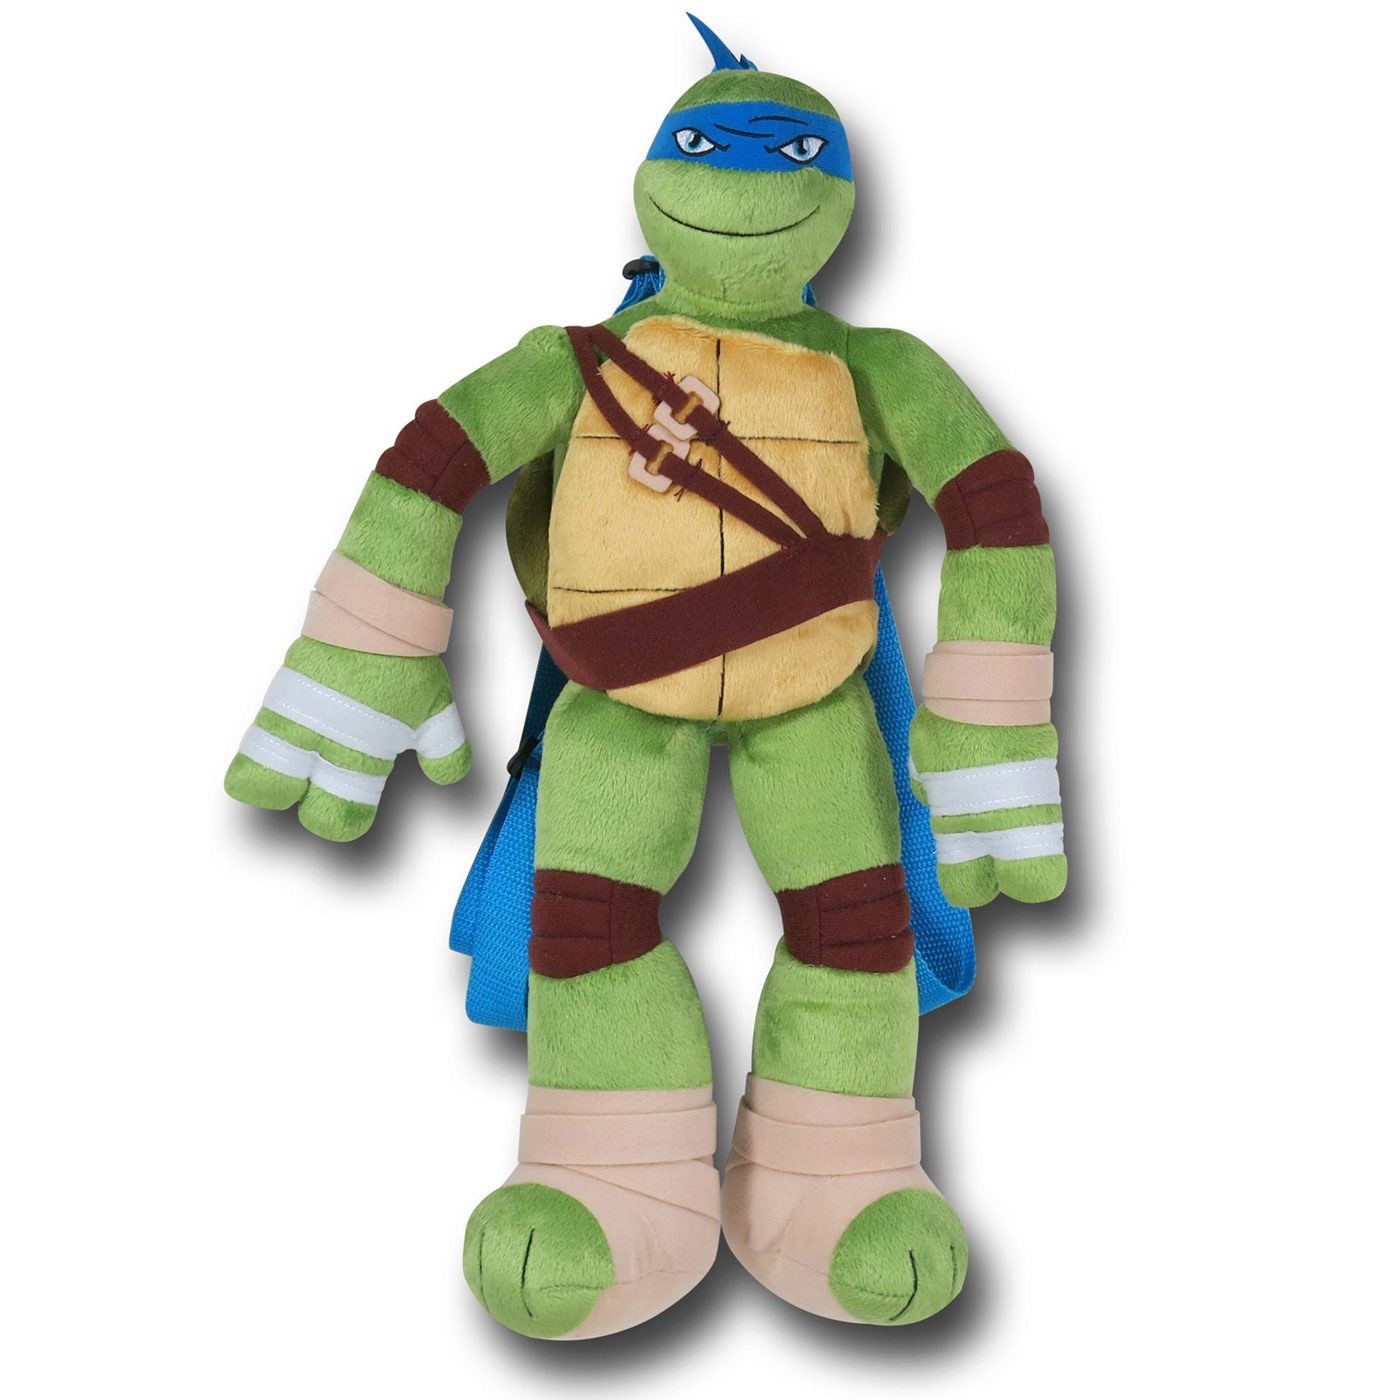 TMNT Retro Character Youth 14' Plush Backpack